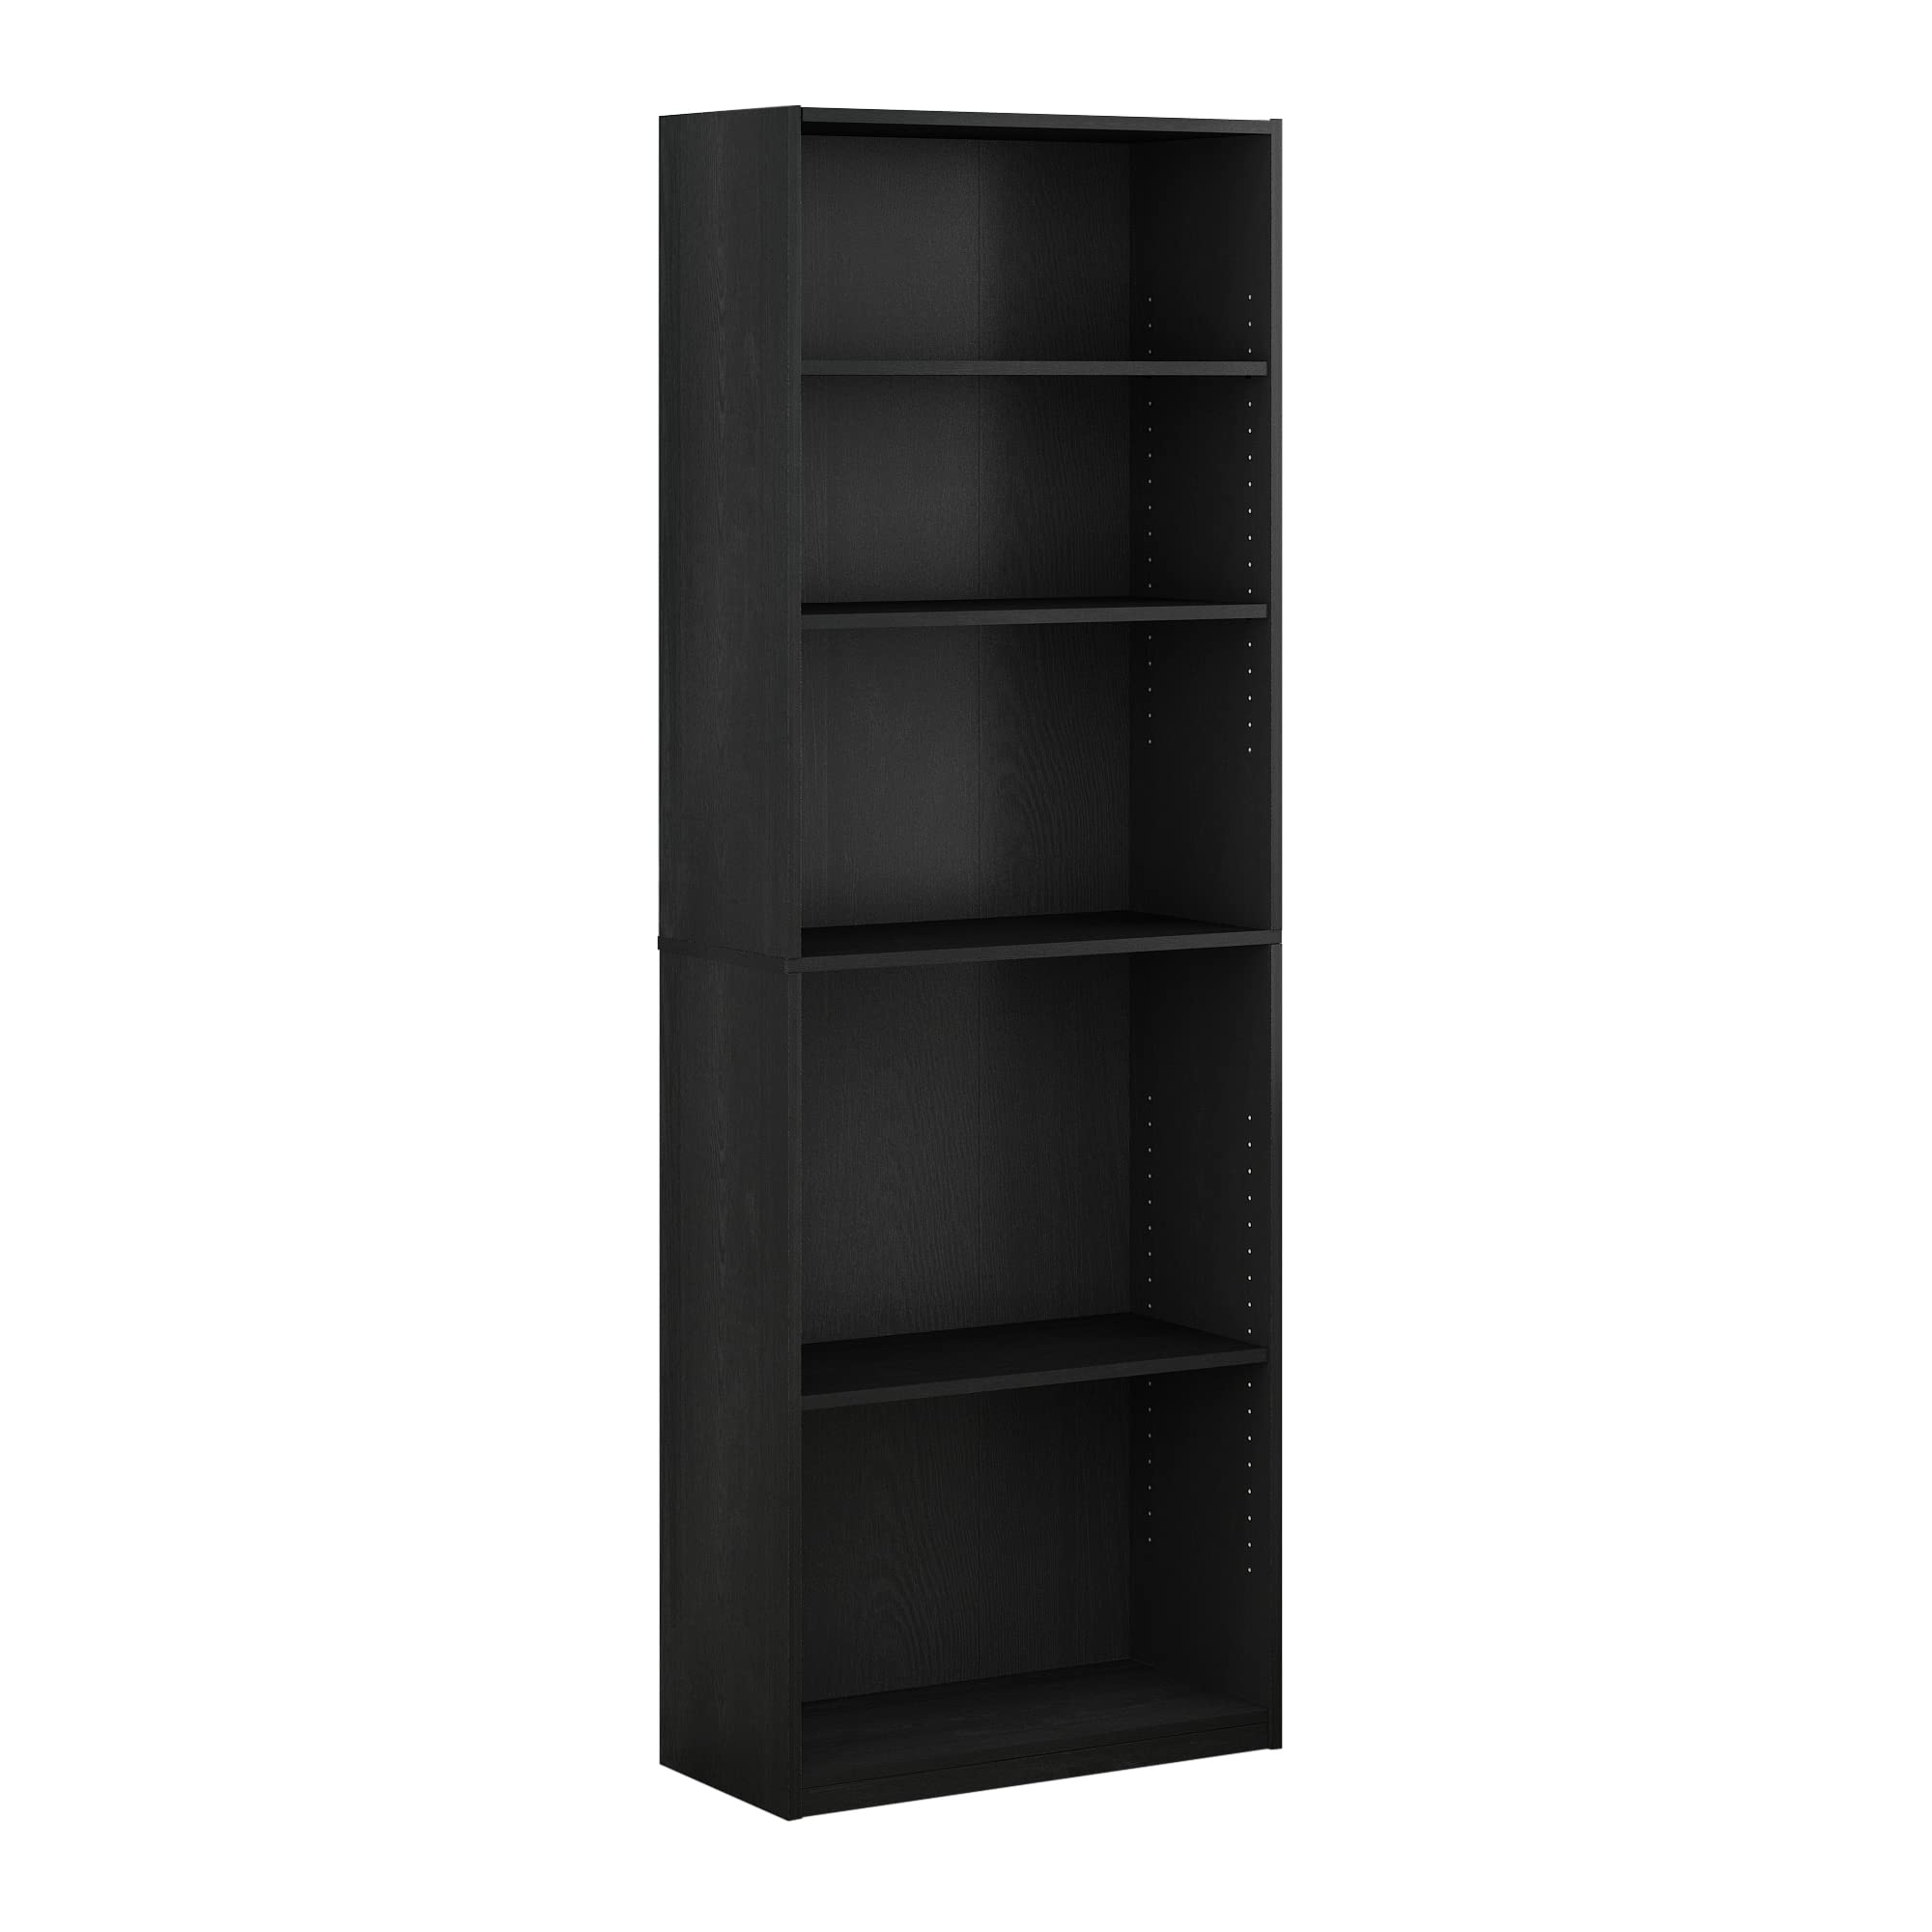 Bookshelves and Bookcases Floor Standing 5-Tier Display Storage Shelves Home Decor Furniture